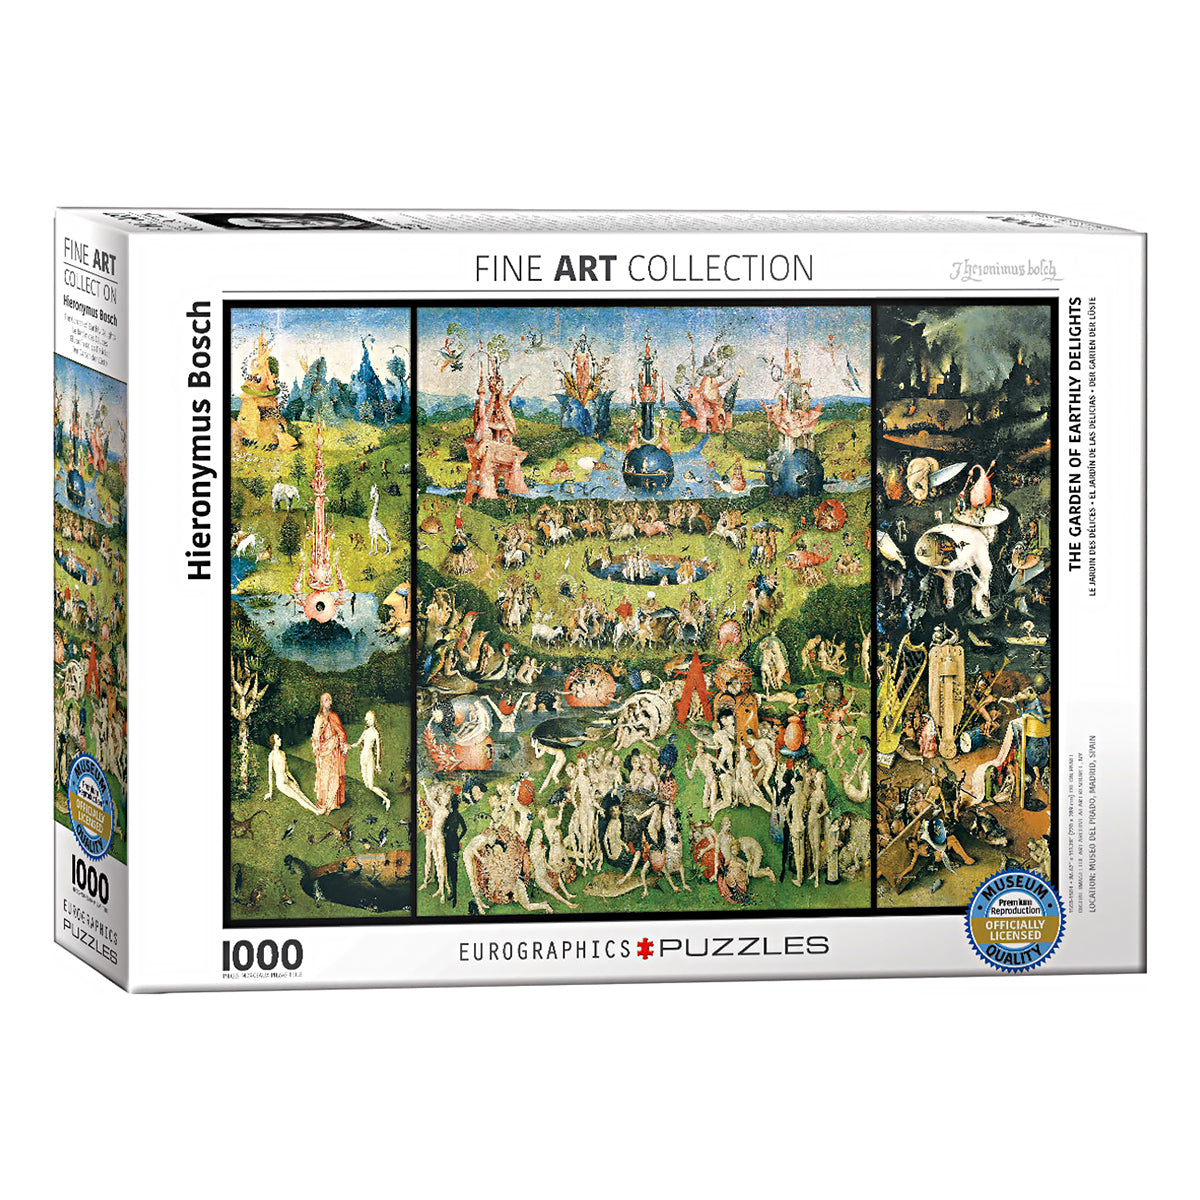 Transform your space into a work of art with Eurographics' 1000-piece Hieronymus Bosch jigsaw puzzle, inspired by the famous painting The Garden of Earthly Delights.